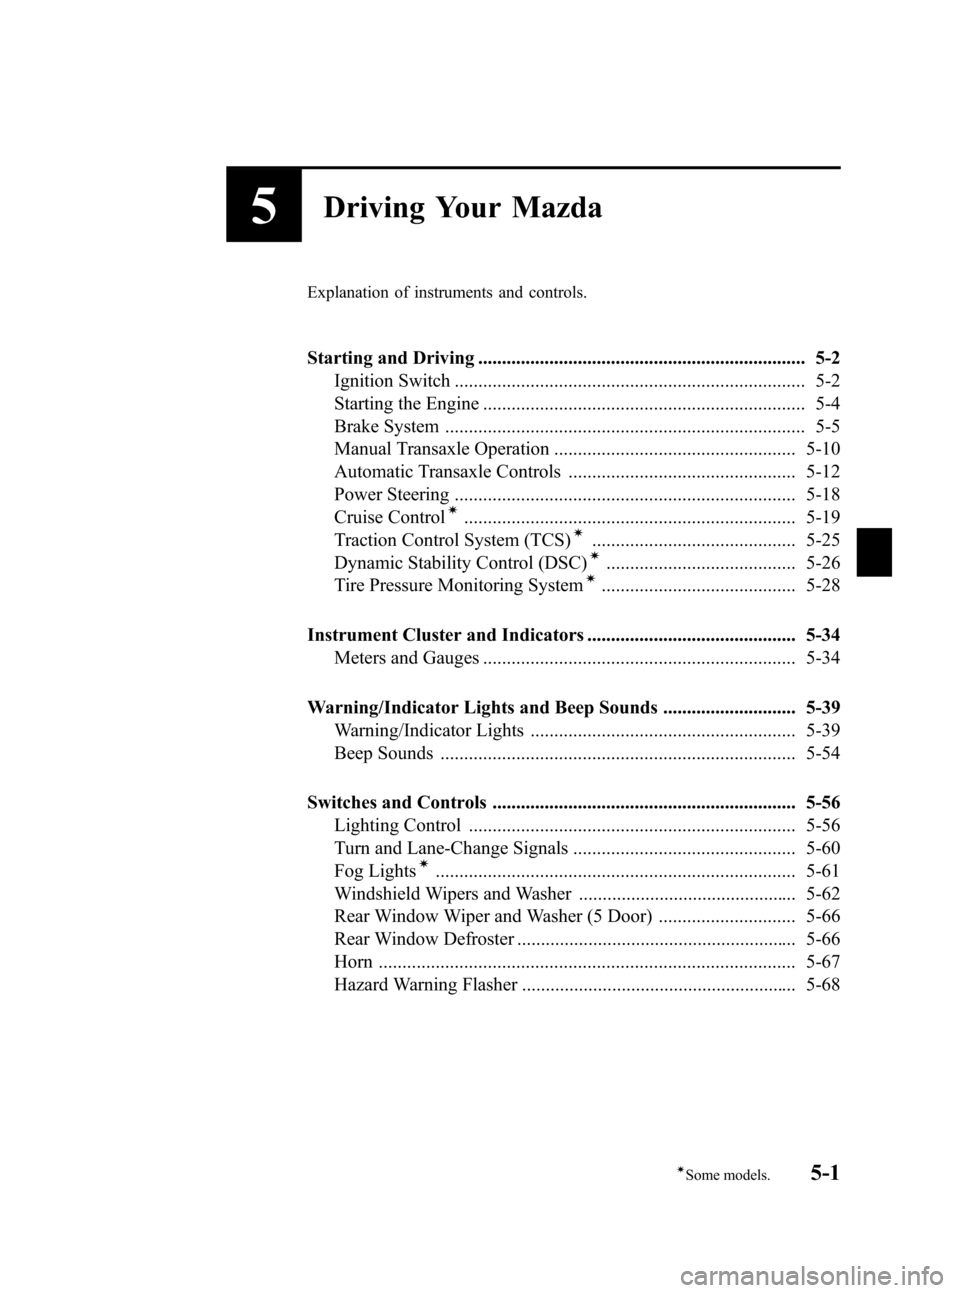 MAZDA MODEL 3 HATCHBACK 2010  Owners Manual (in English) Black plate (157,1)
5Driving Your Mazda
Explanation of instruments and controls.
Starting and Driving ..................................................................... 5-2
Ignition Switch ........